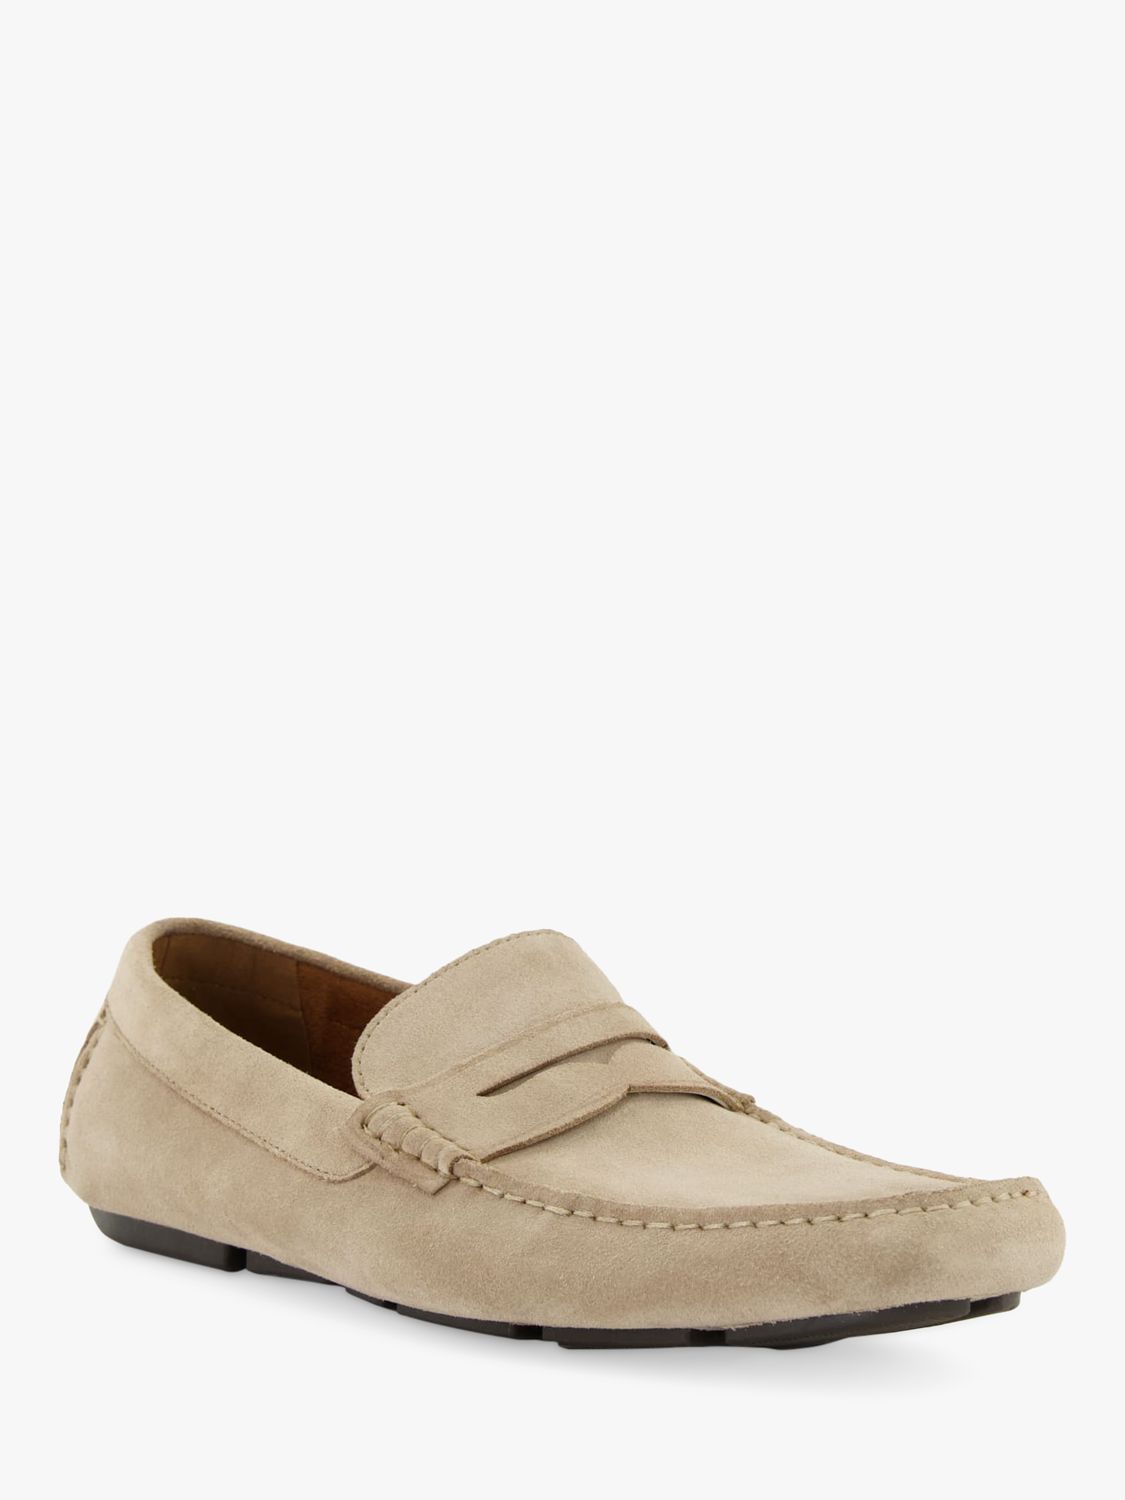 Dune Bradlay Suede Square Toe Moccasin Loafers, Sand-suede at John ...